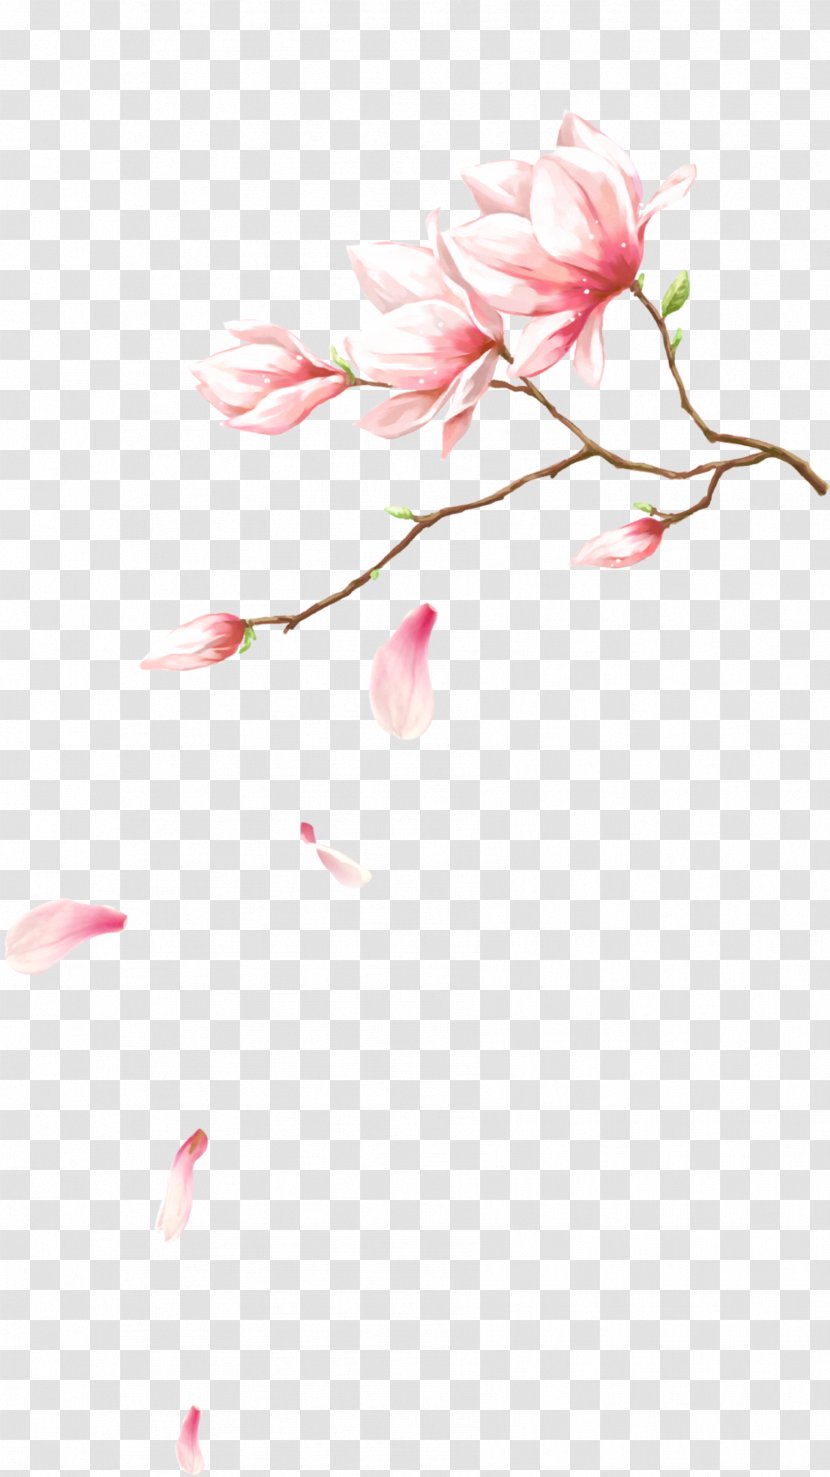 Pink Flowers Petal Computer File - Plant - With Petals Falling On Transparent PNG